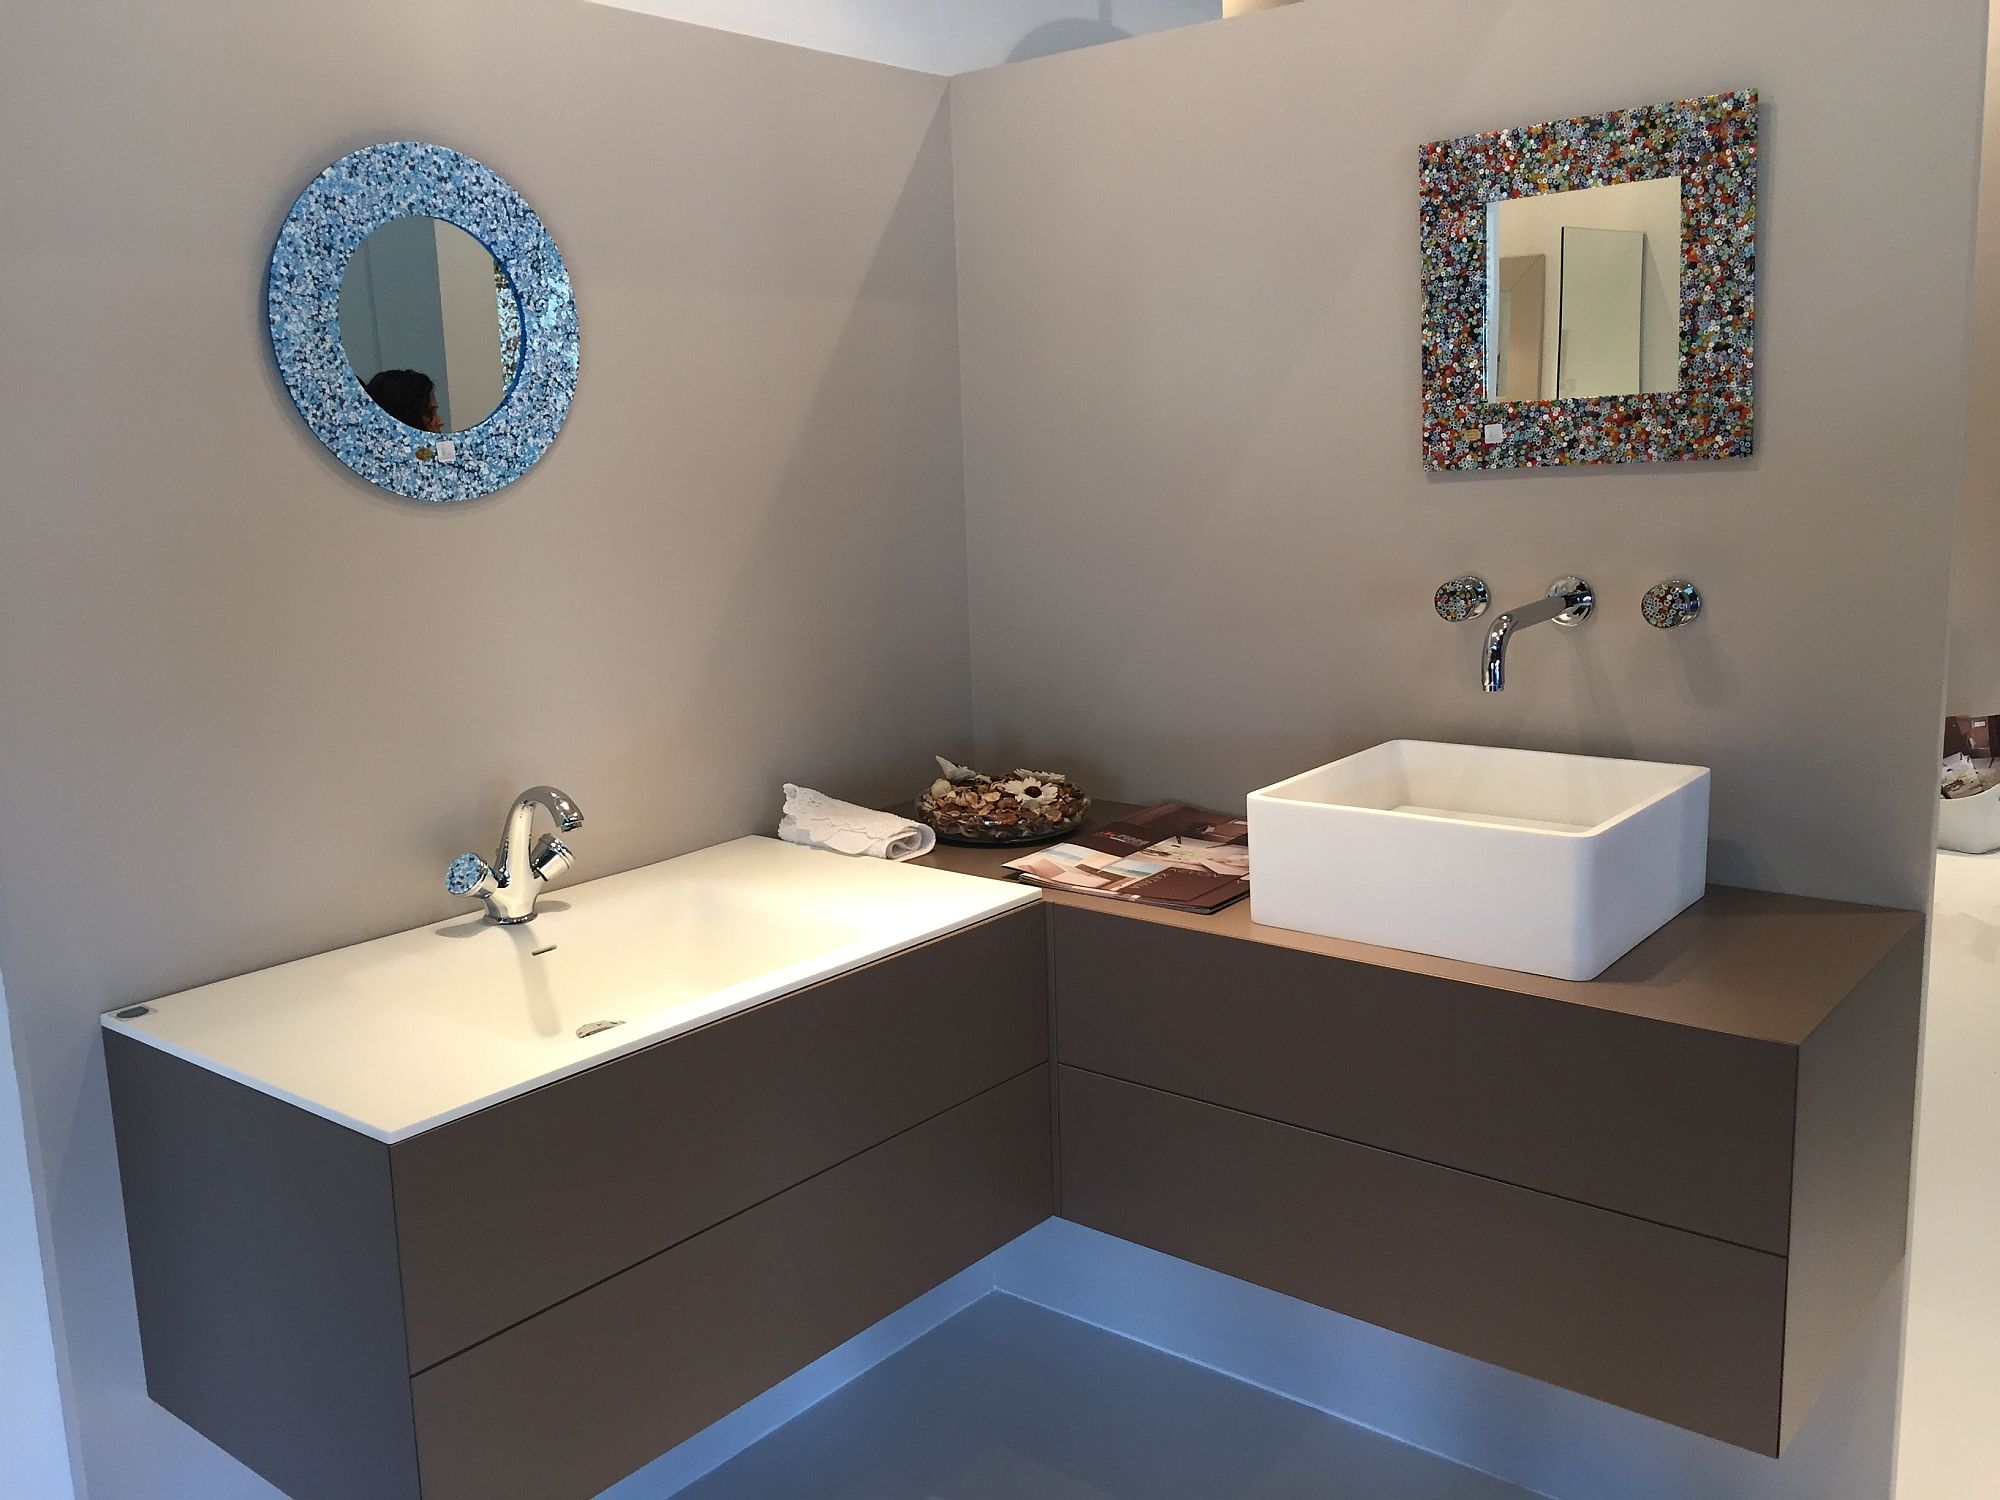 Colorful and invetive mirror frames enliven the contemporary bathroom